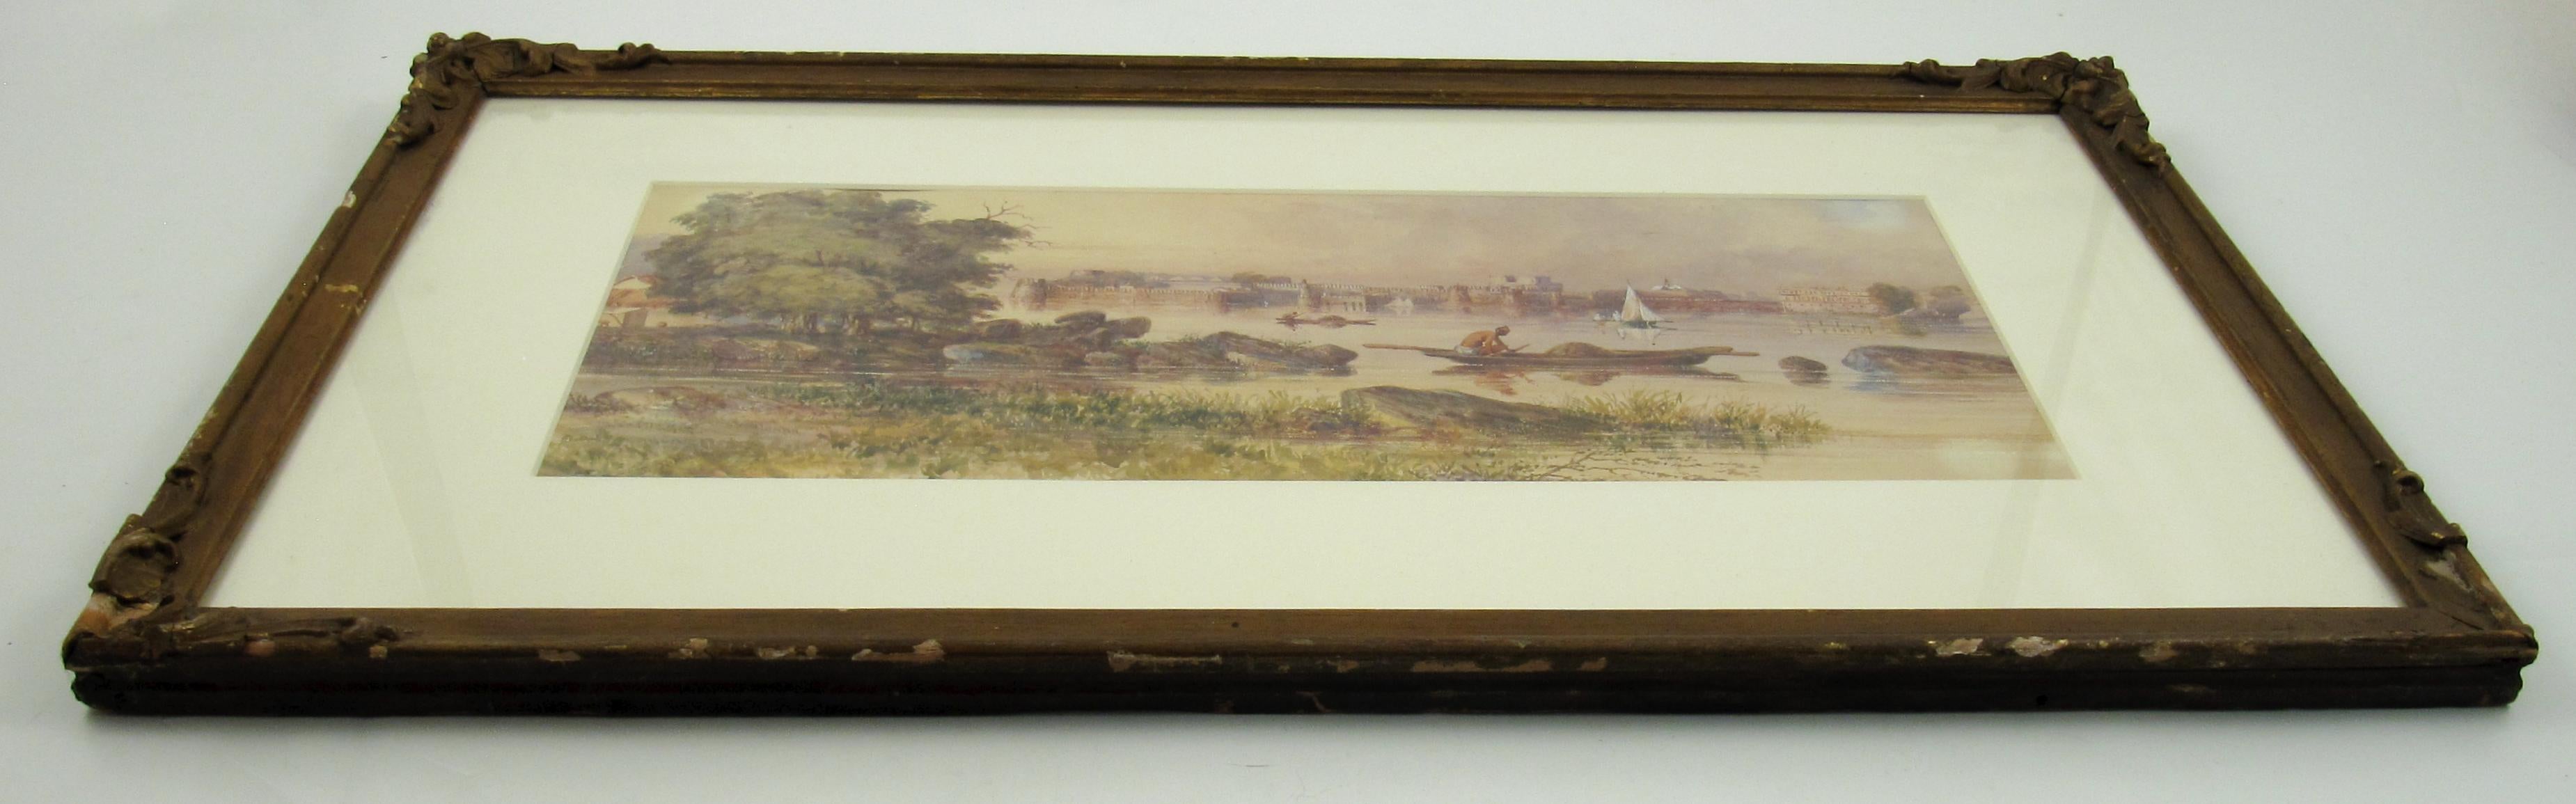 Charles George Nicholls - Watercolour 1805 - Palace on the Ganges, Anglo - India For Sale 4